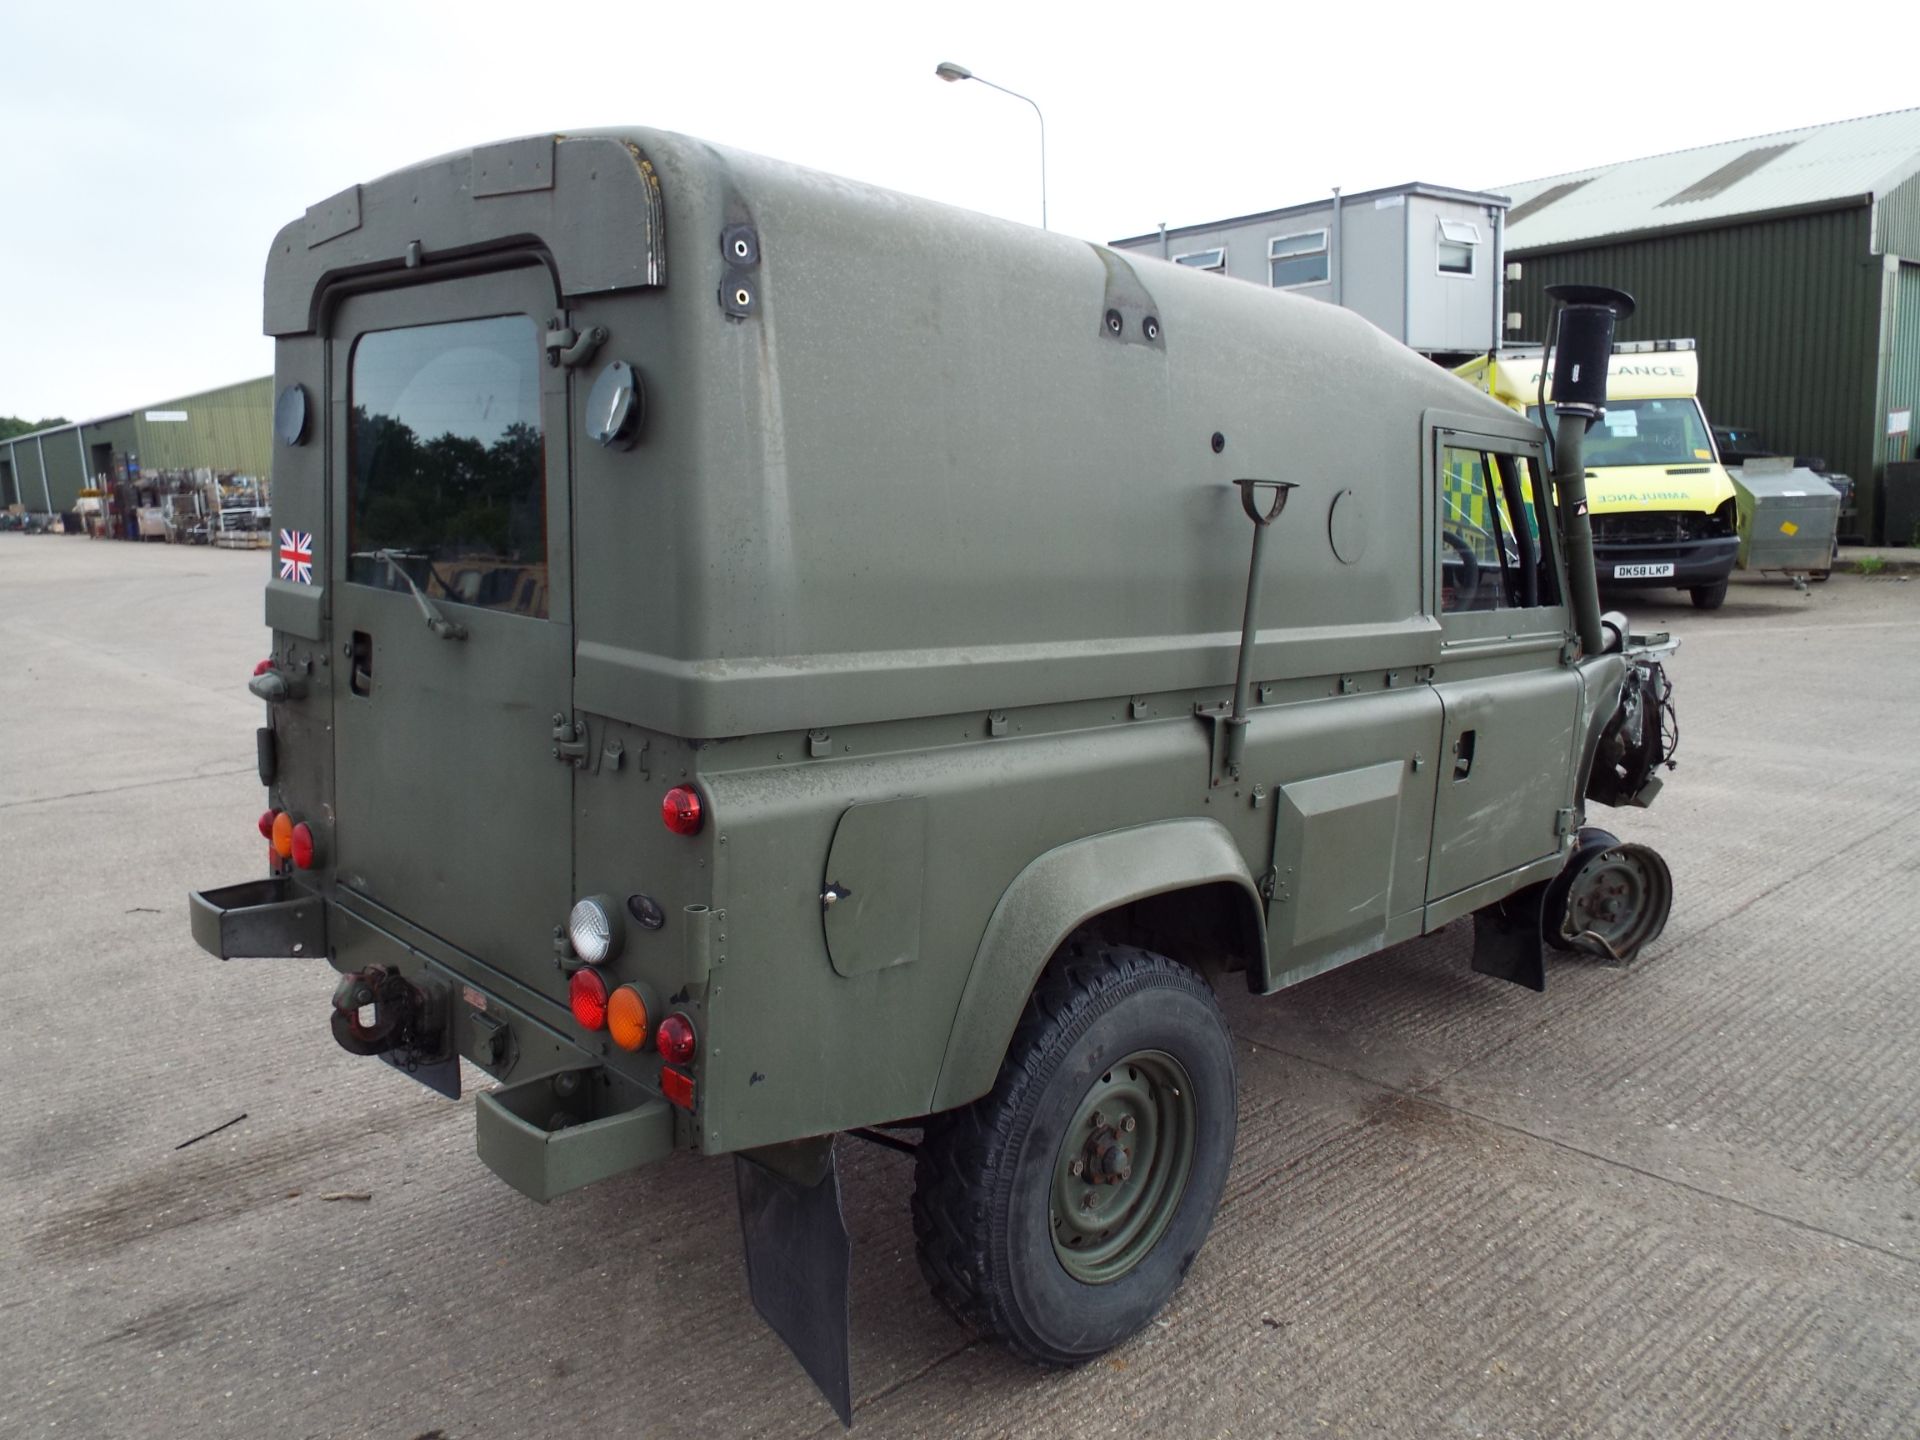 Royal Marines a Very Rare Winter/Water Land Rover Wolf 110 Hard Top - Image 5 of 27